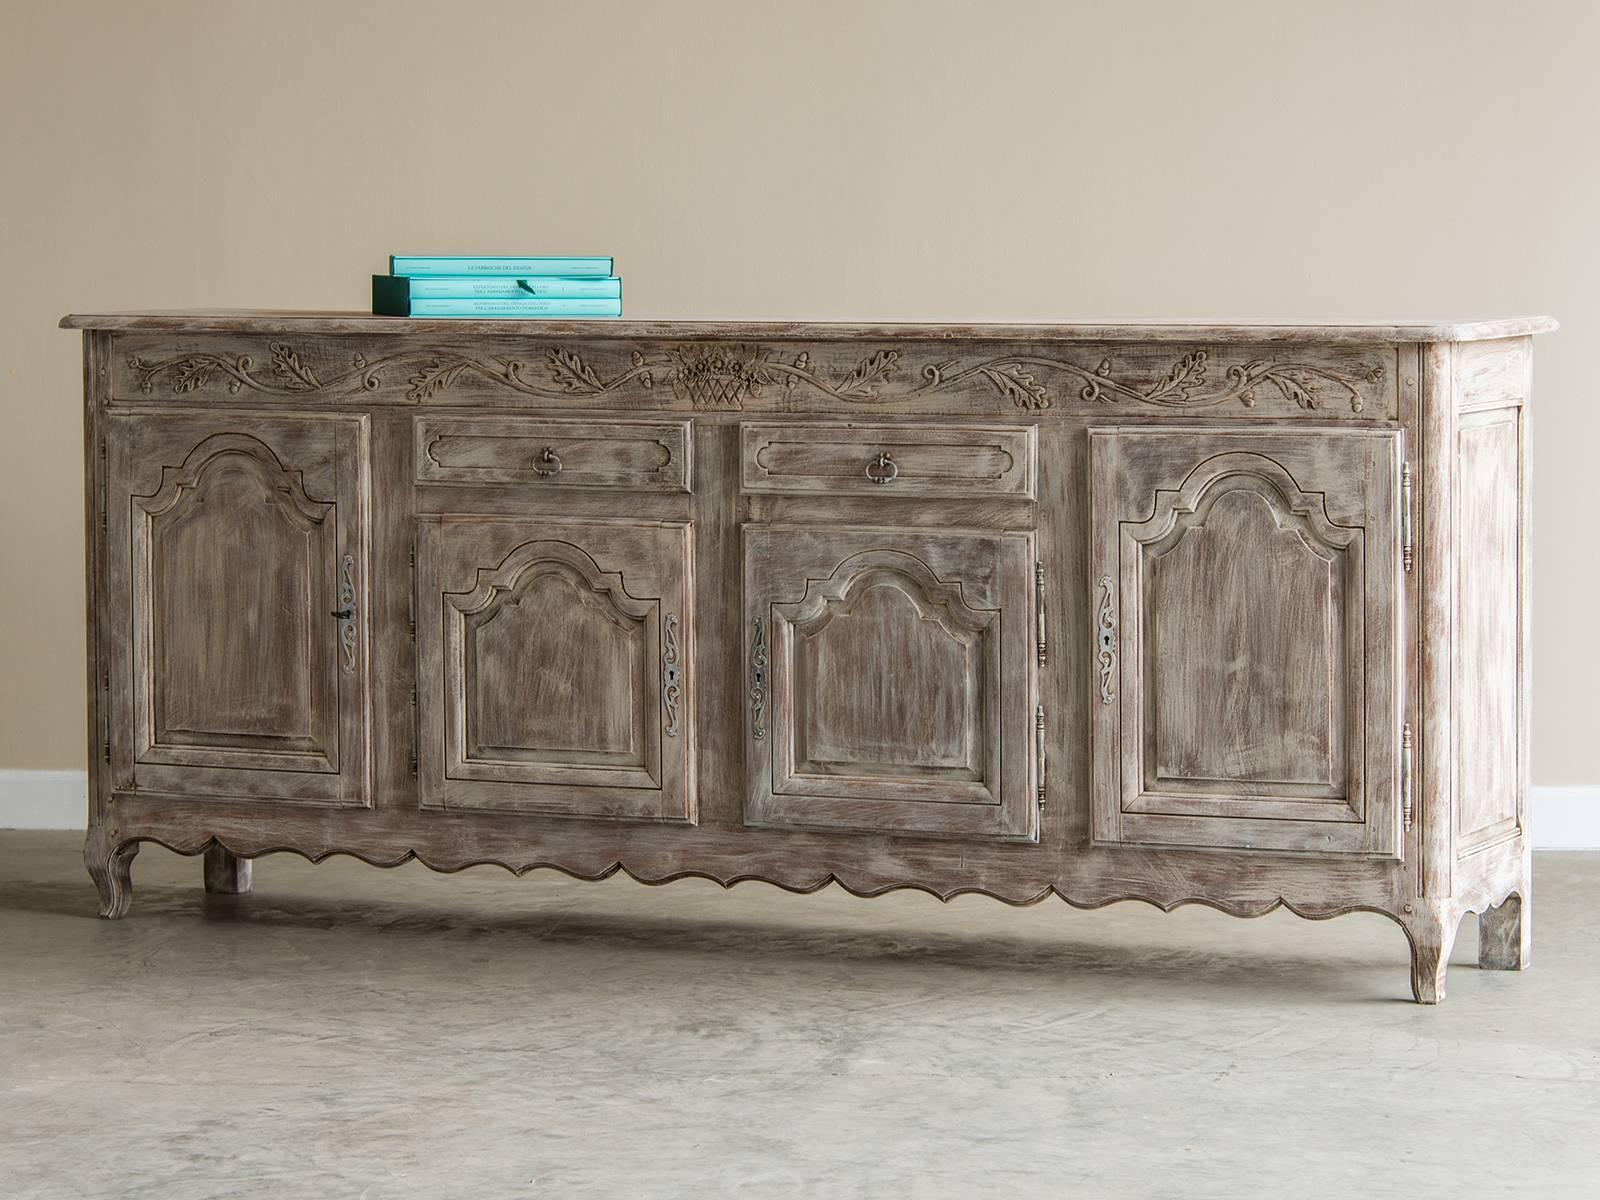 The beautiful detail on this buffet includes an enchanting floral and leaf swag that extends from side to side above the cabinet doors and beneath the serving surface. All of the cabinet doors feature a recessed panel with a moulded edge that throws